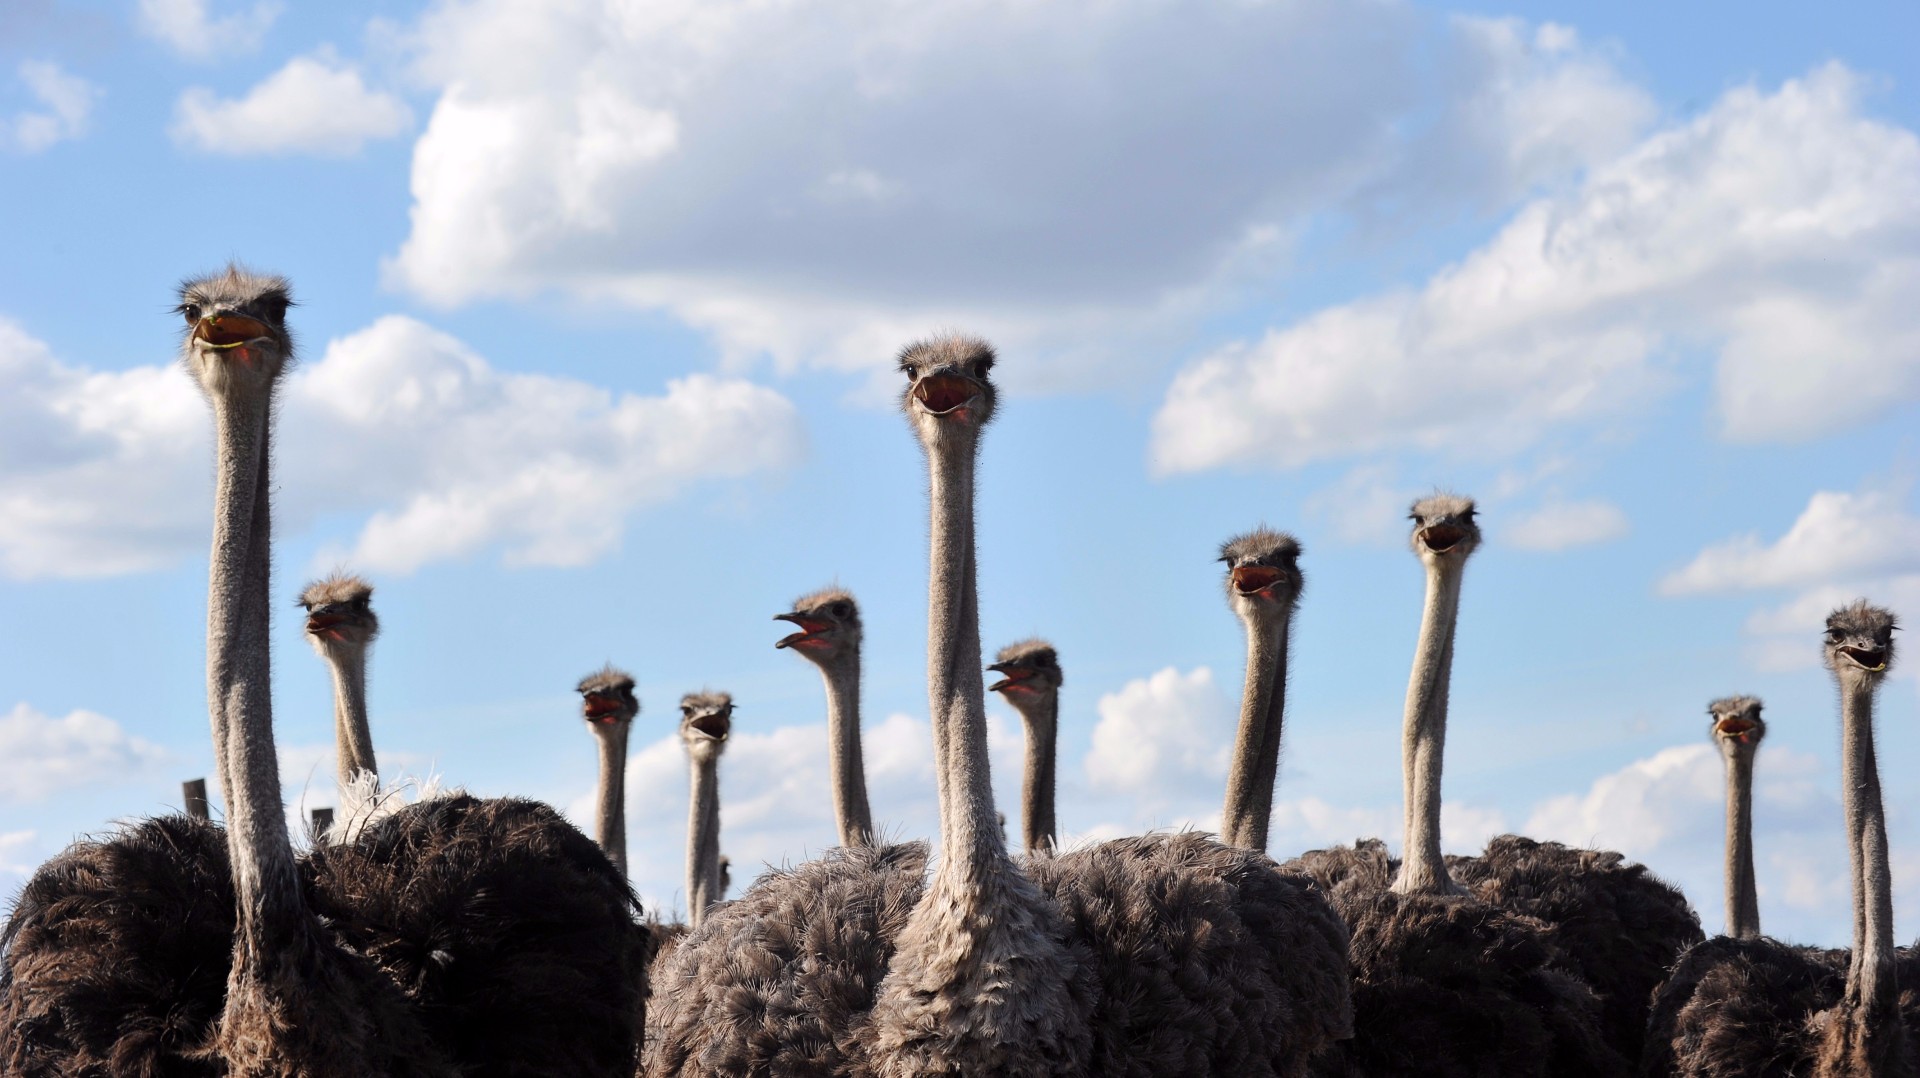 Here's how to get discount tickets to the Ostrich Festival